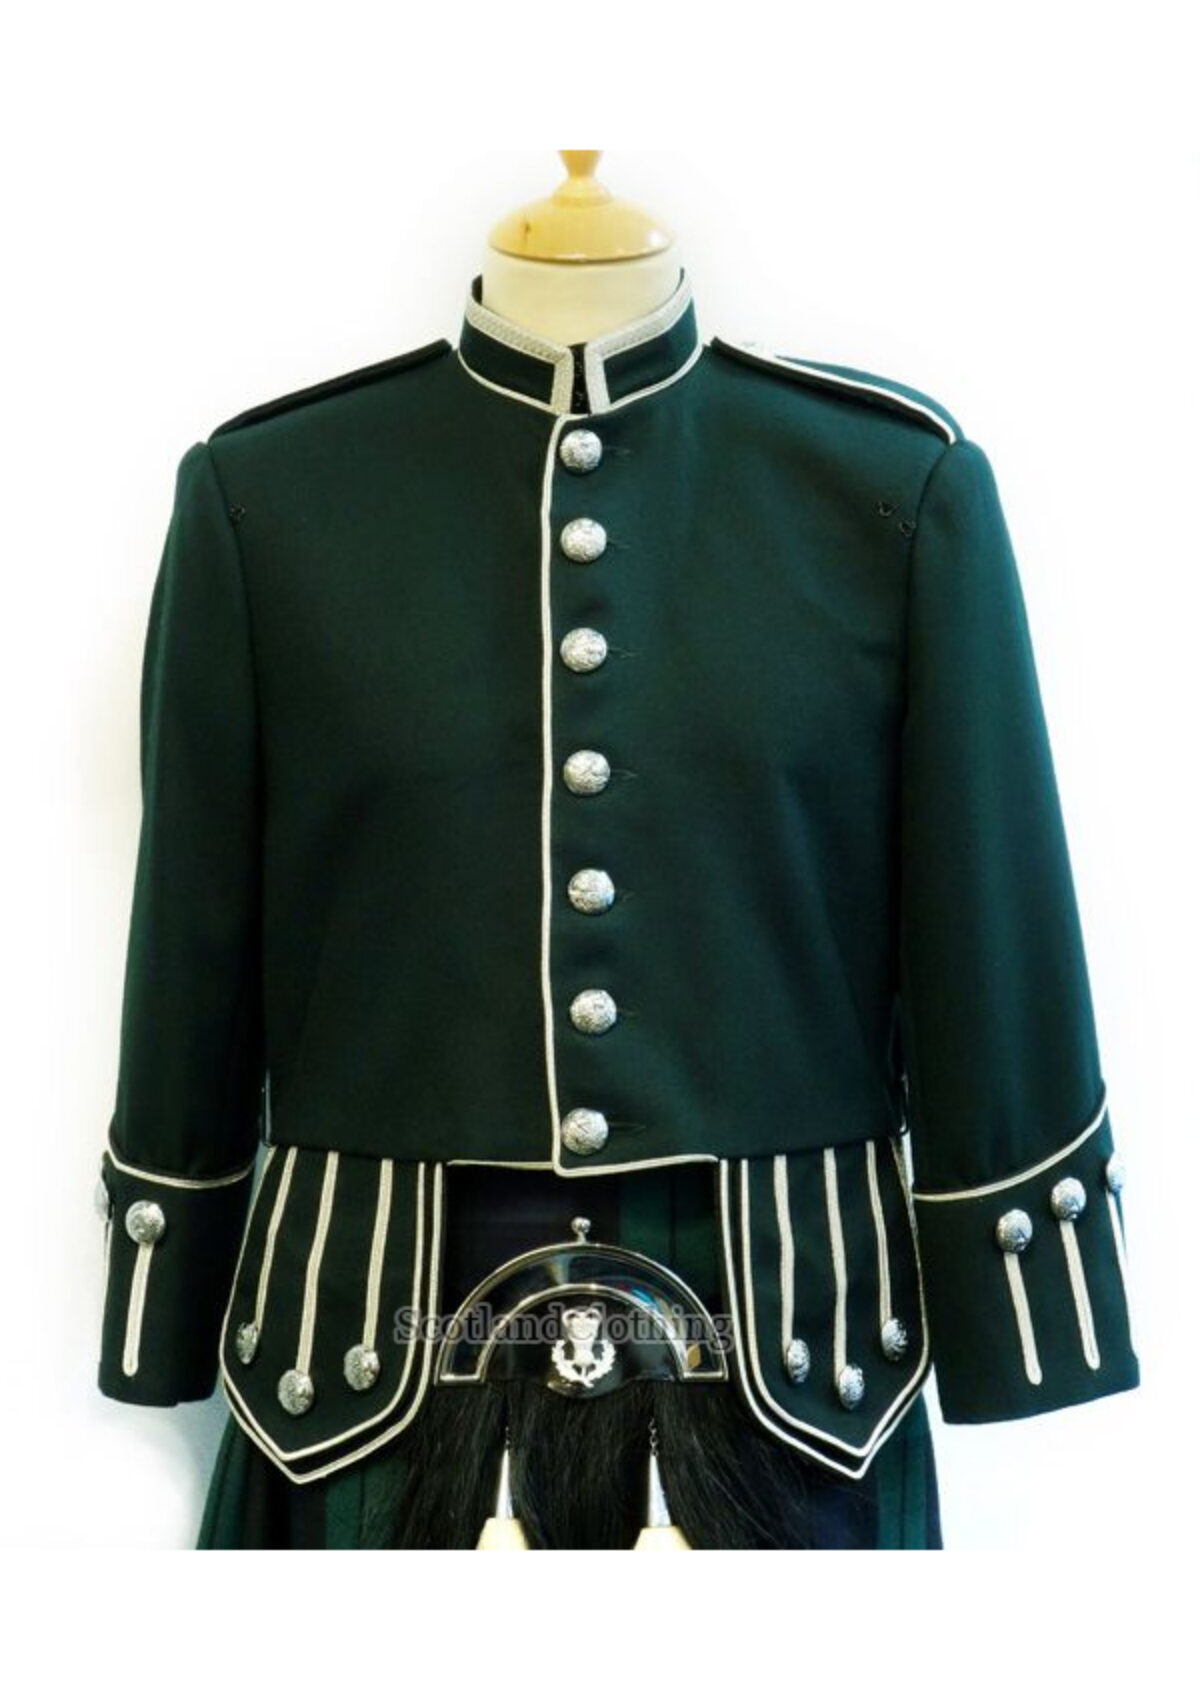 30 To 60 " Brand New Military Piper Drummer Doublet Tunic Blue Jacket 100% Wool 